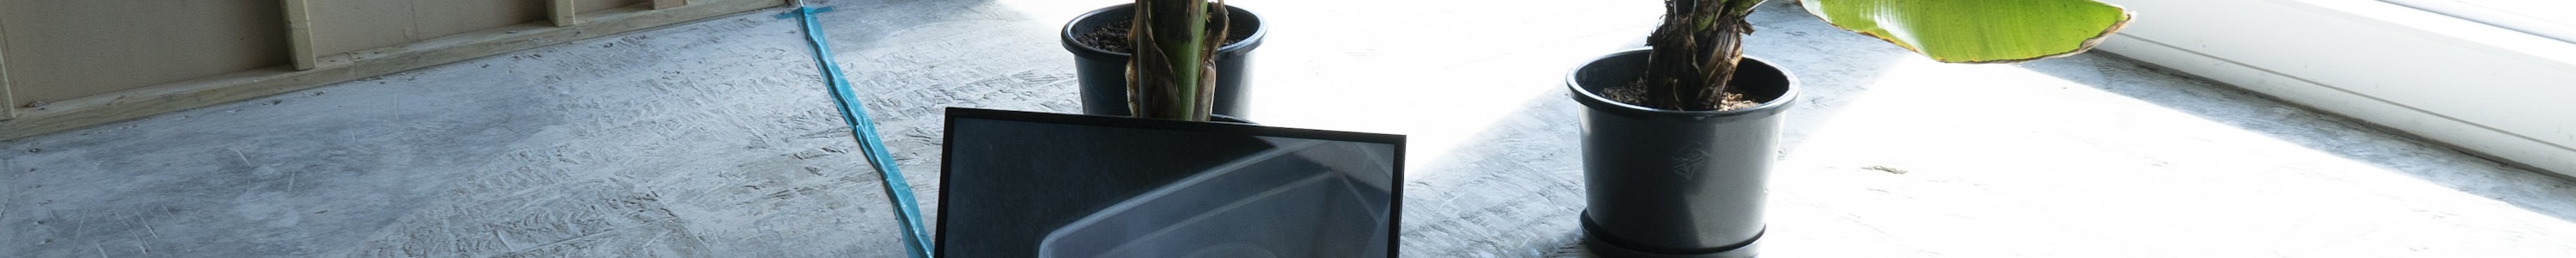 A TV screen on a concrete floor leans up against a large plant within a brightly lit room. The TV is playing a video work made by Anna Brimmer as part of Home Movies project by CIRCUIT.